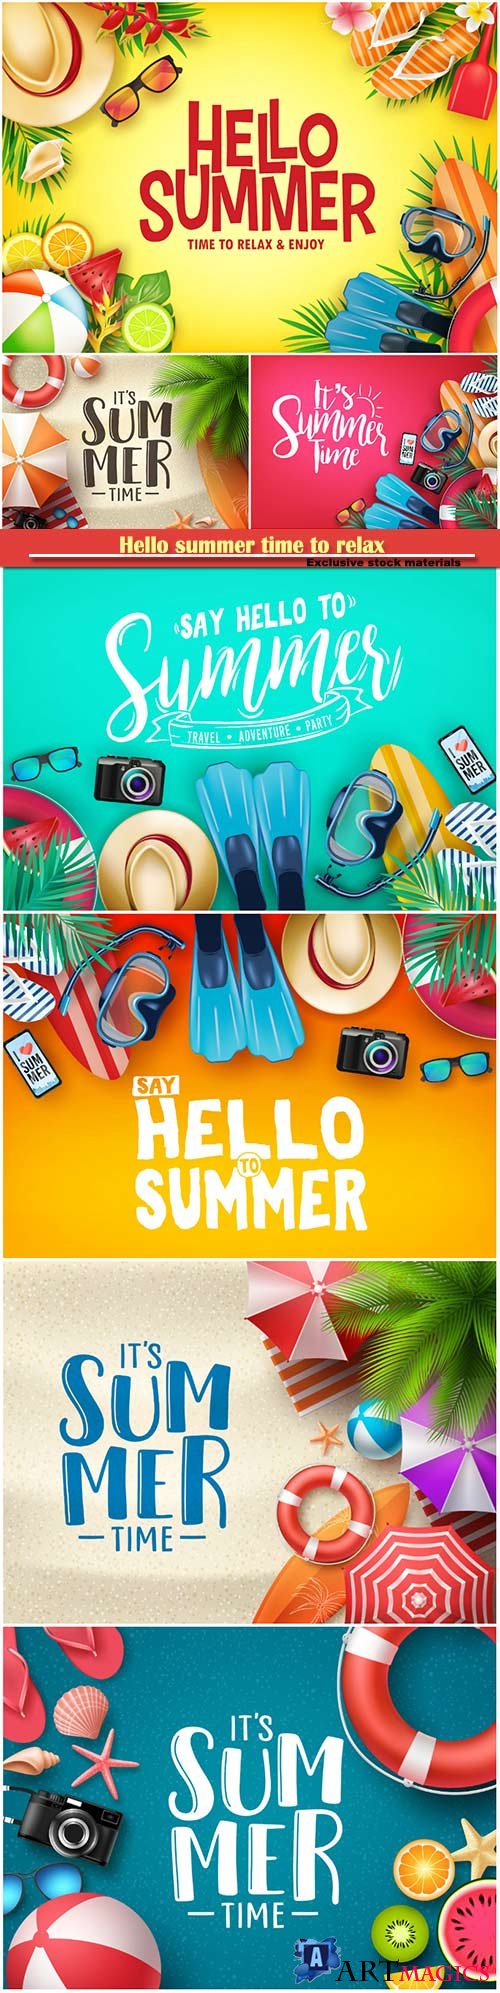 Hello summer time to relax and enjoy vector illustration # 2